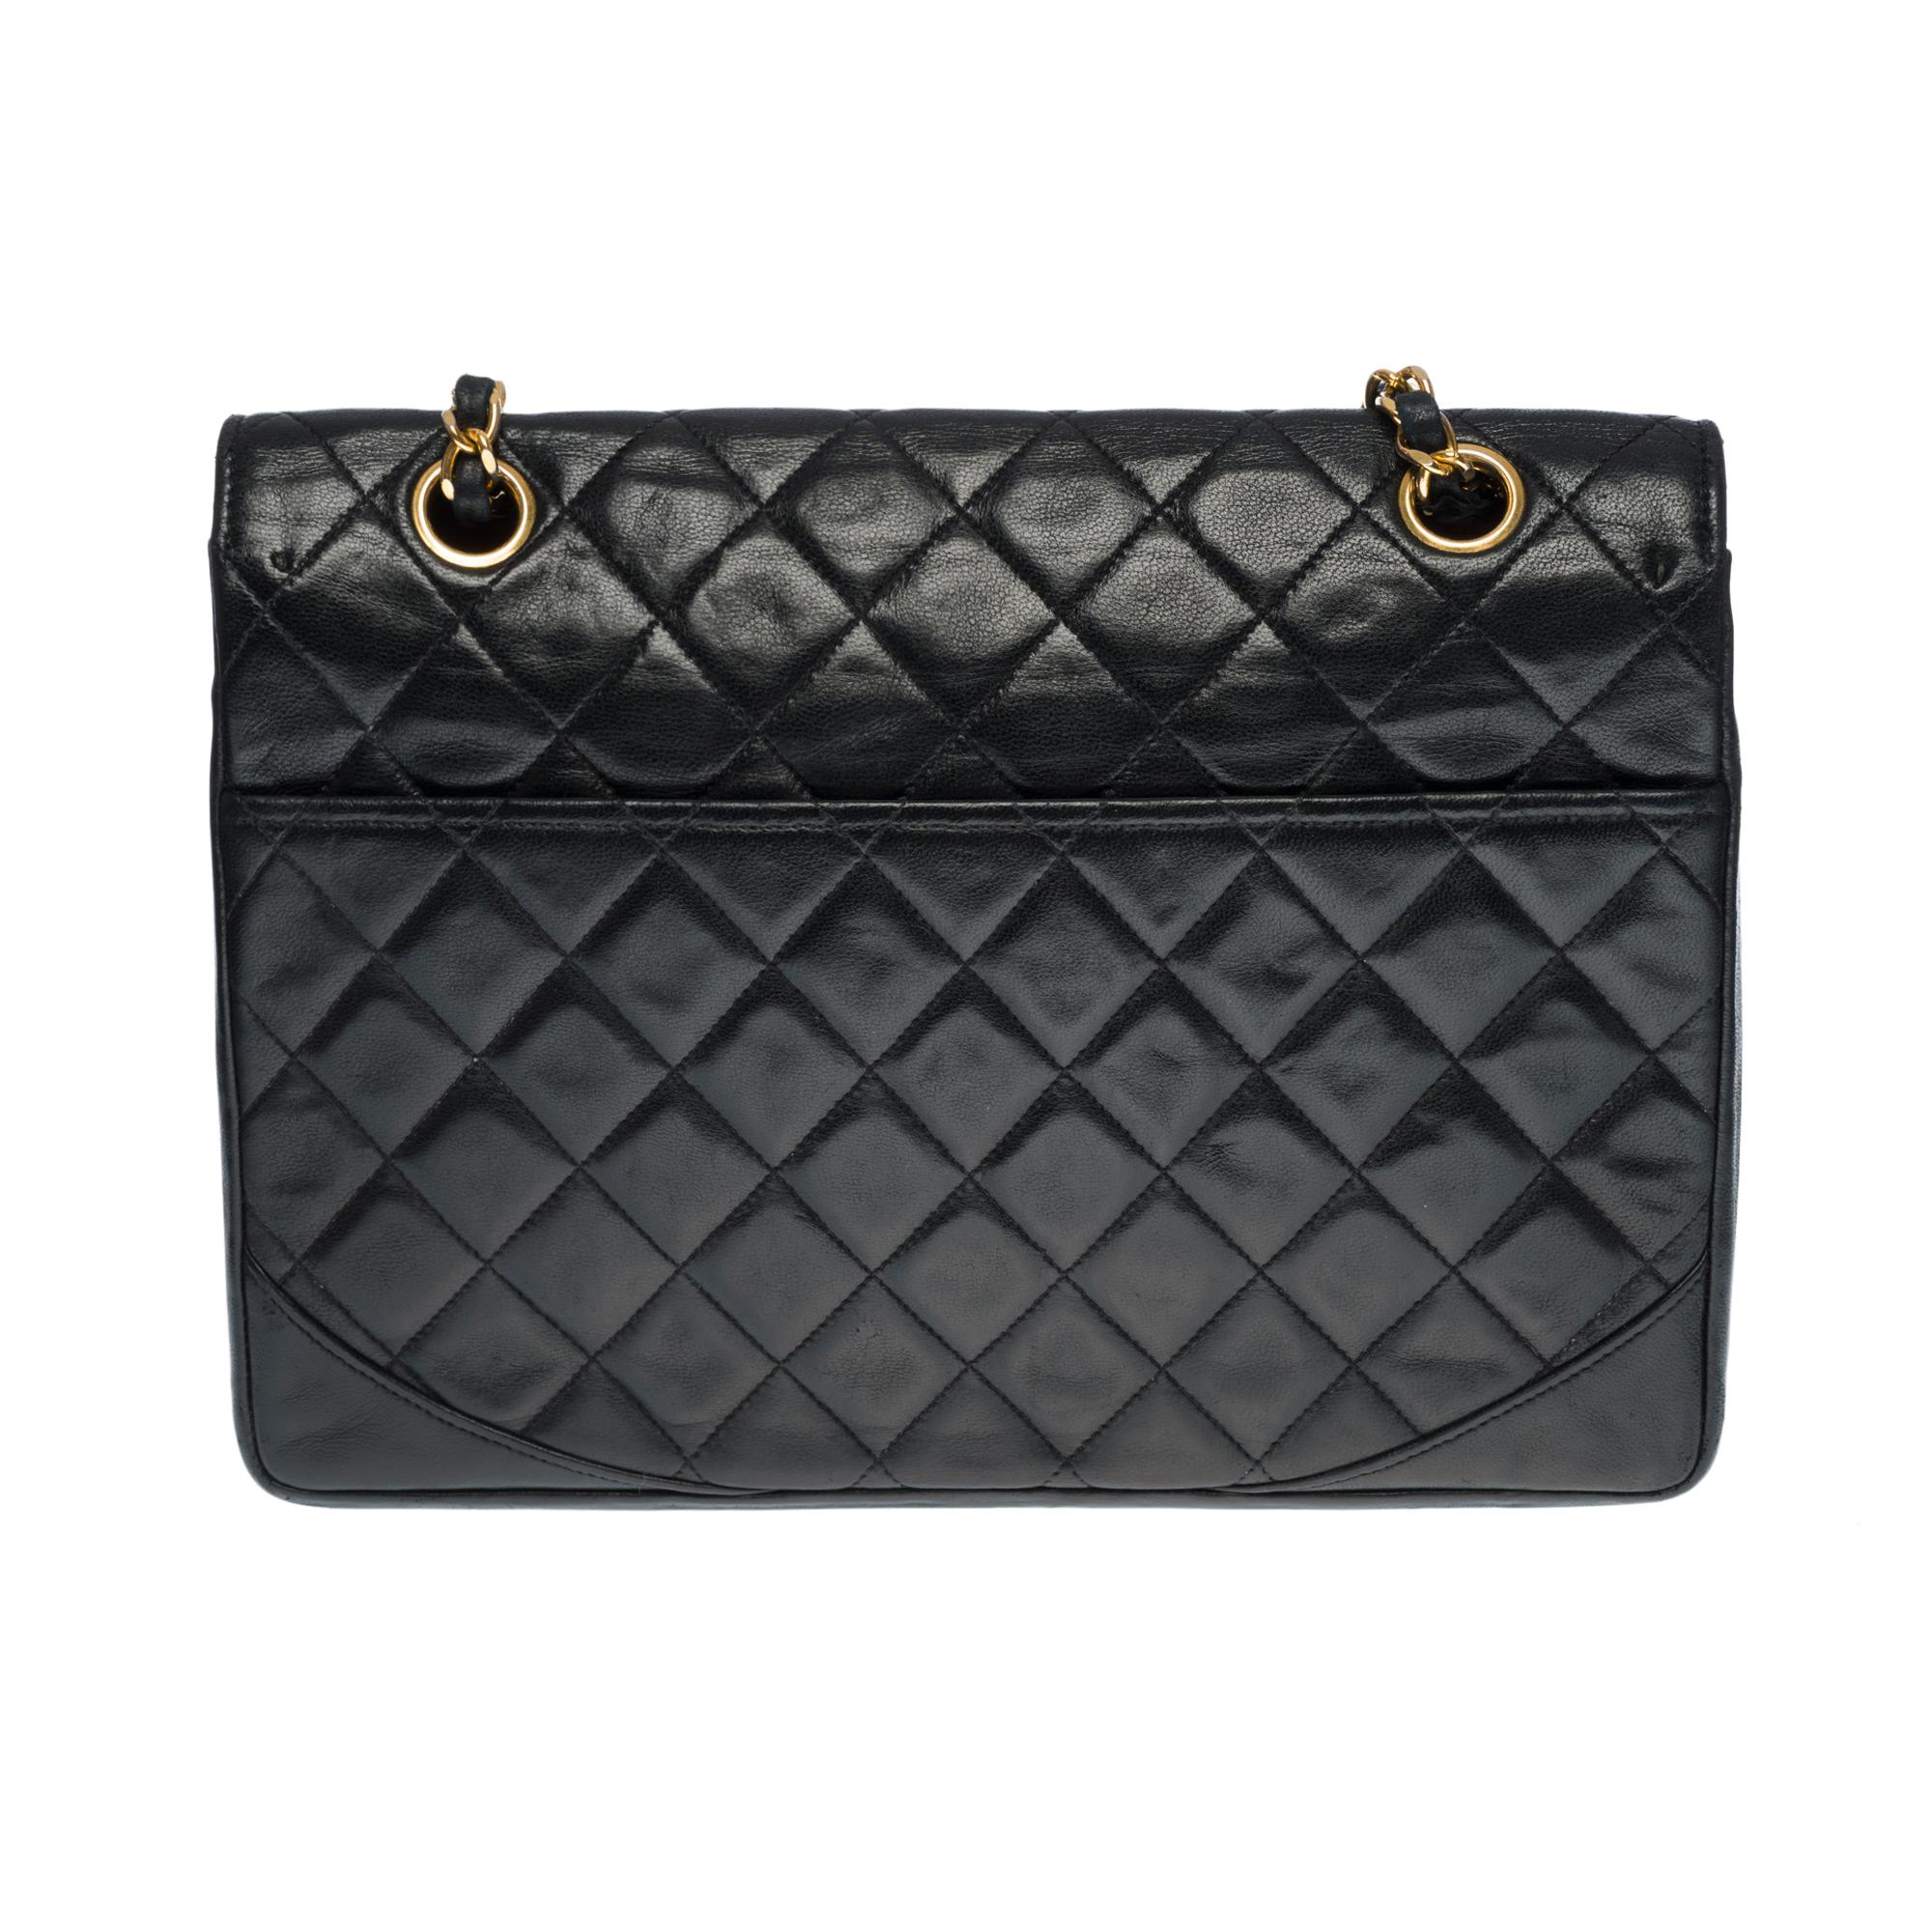 Splendid shoulder bag Chanel Classique Flap bag in black quilted leather, gold-plated metal hardware, a chain-handle in gold-plated metal interlaced with black leather for a shoulder carry

Backpack pocket
Single Flap
Closure in gilded metal on